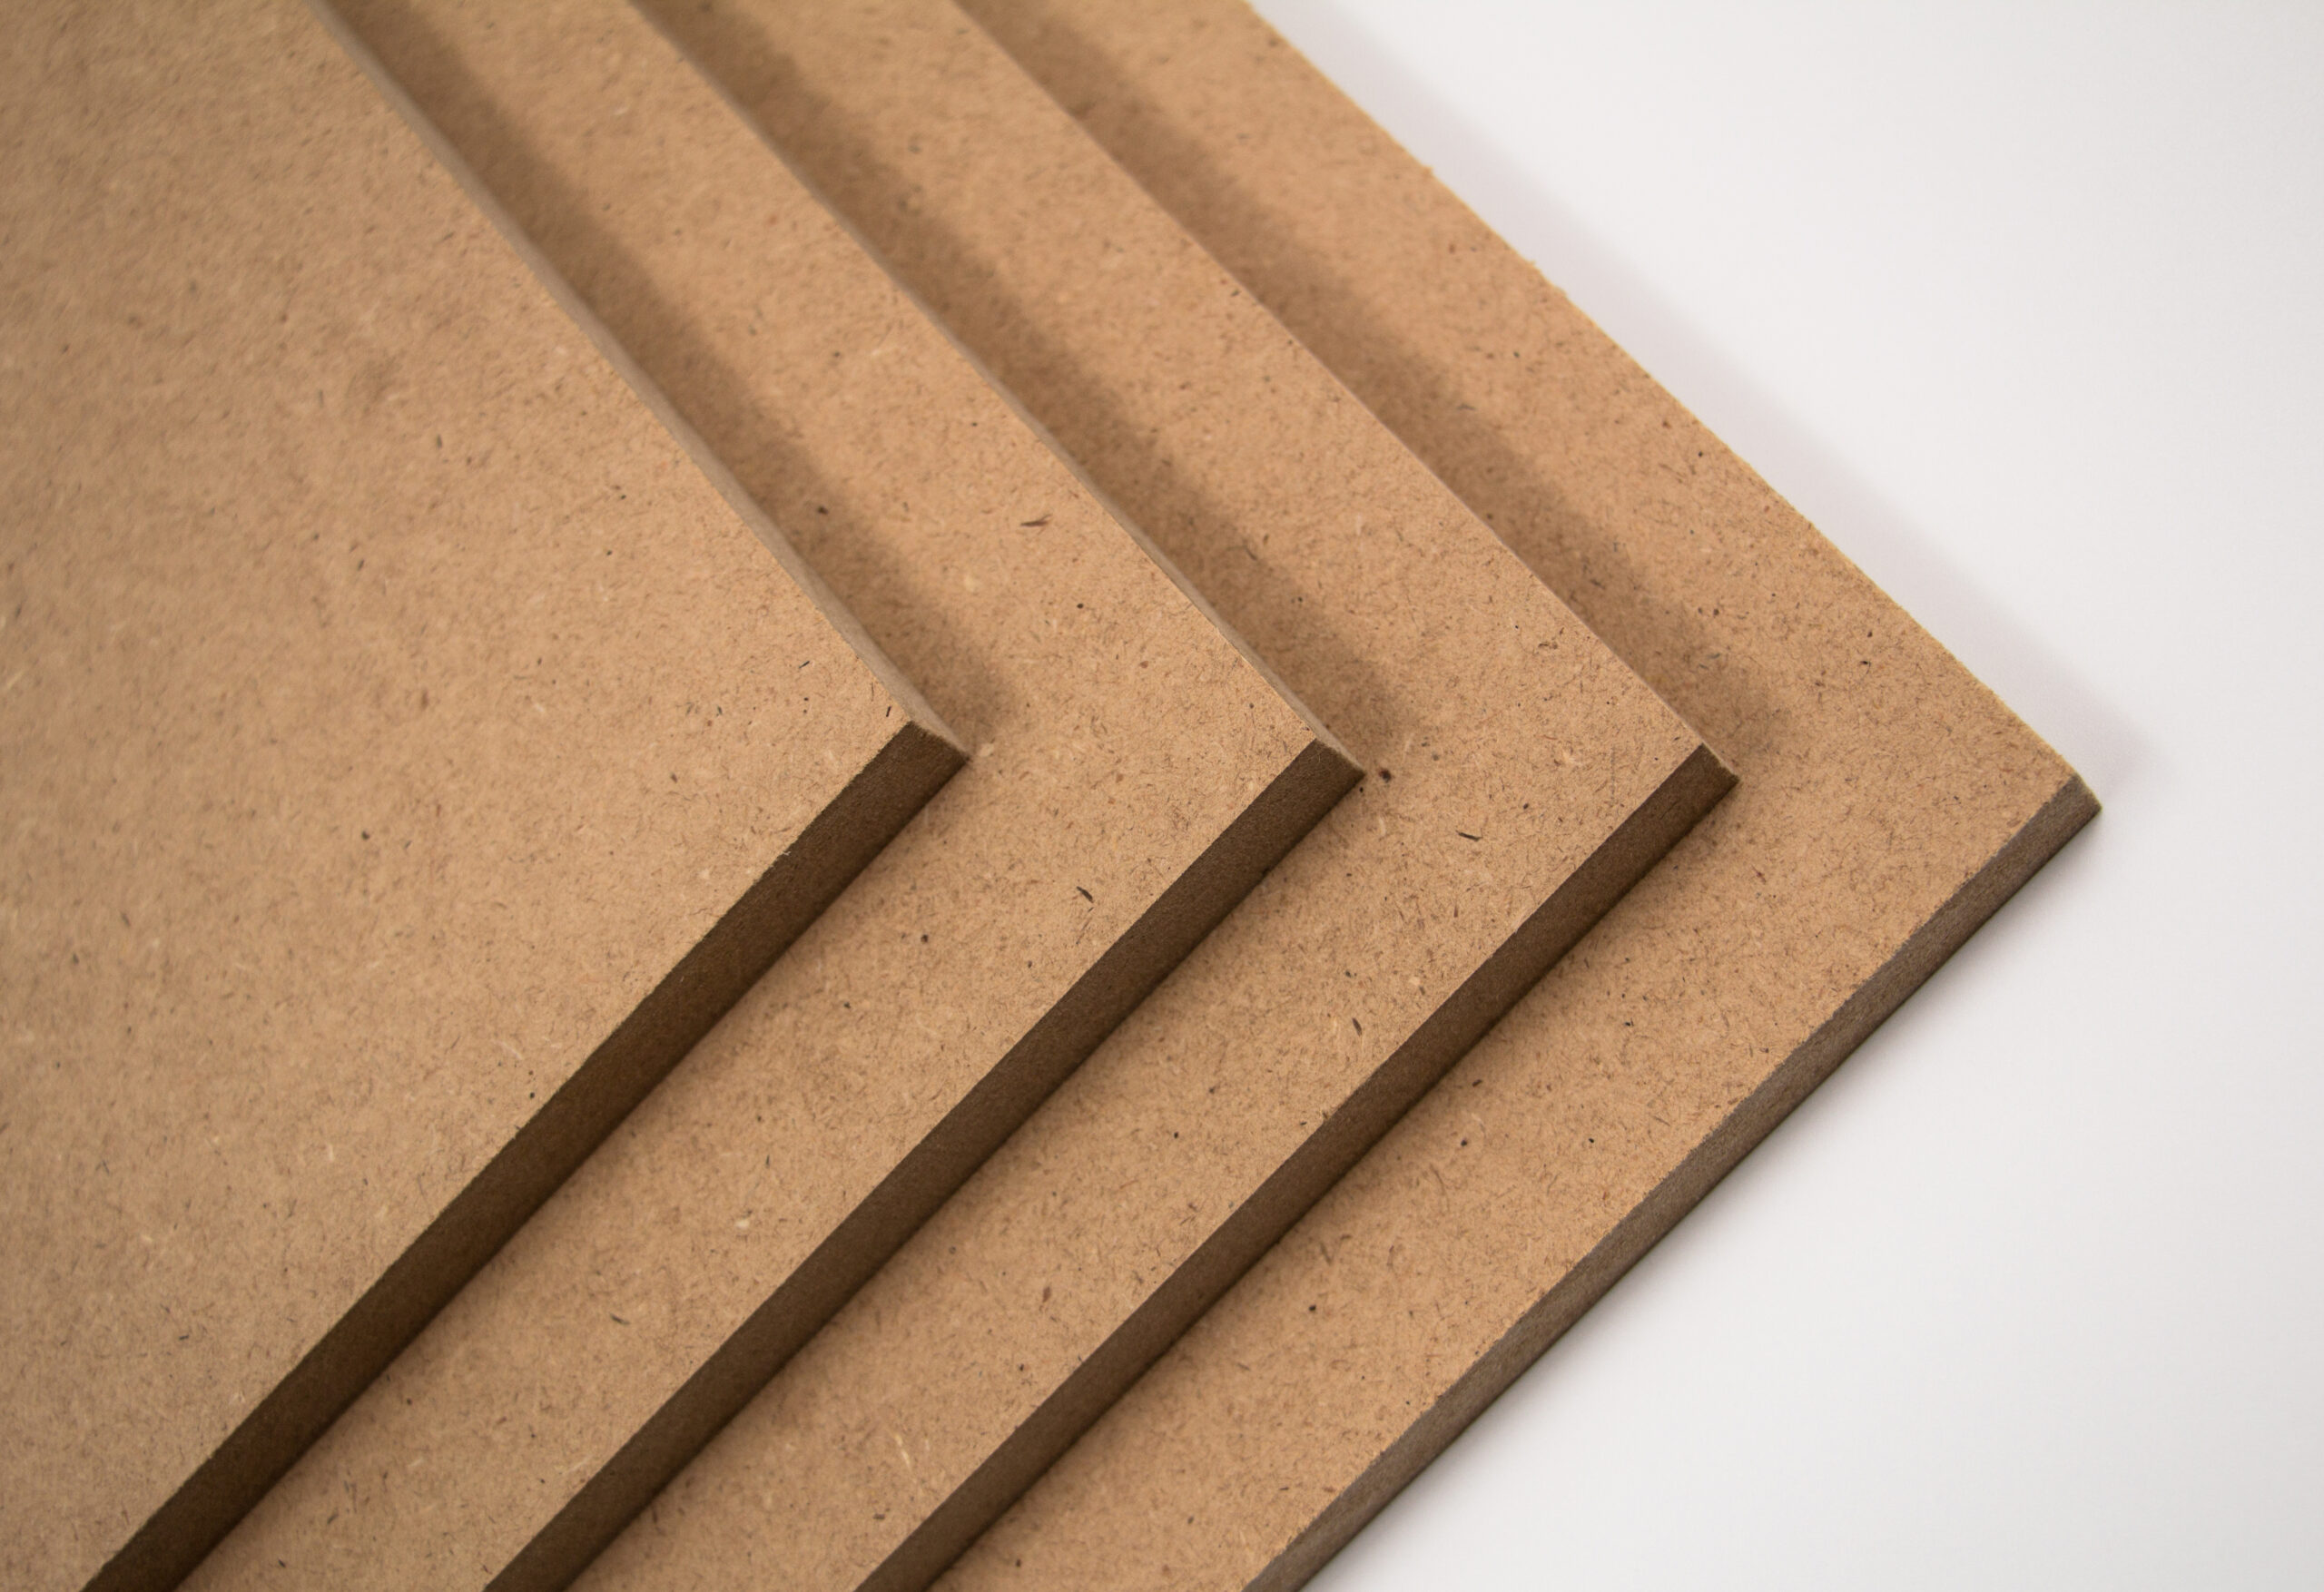 Raw MDF boards, brown in color. They are made of chopped wood.